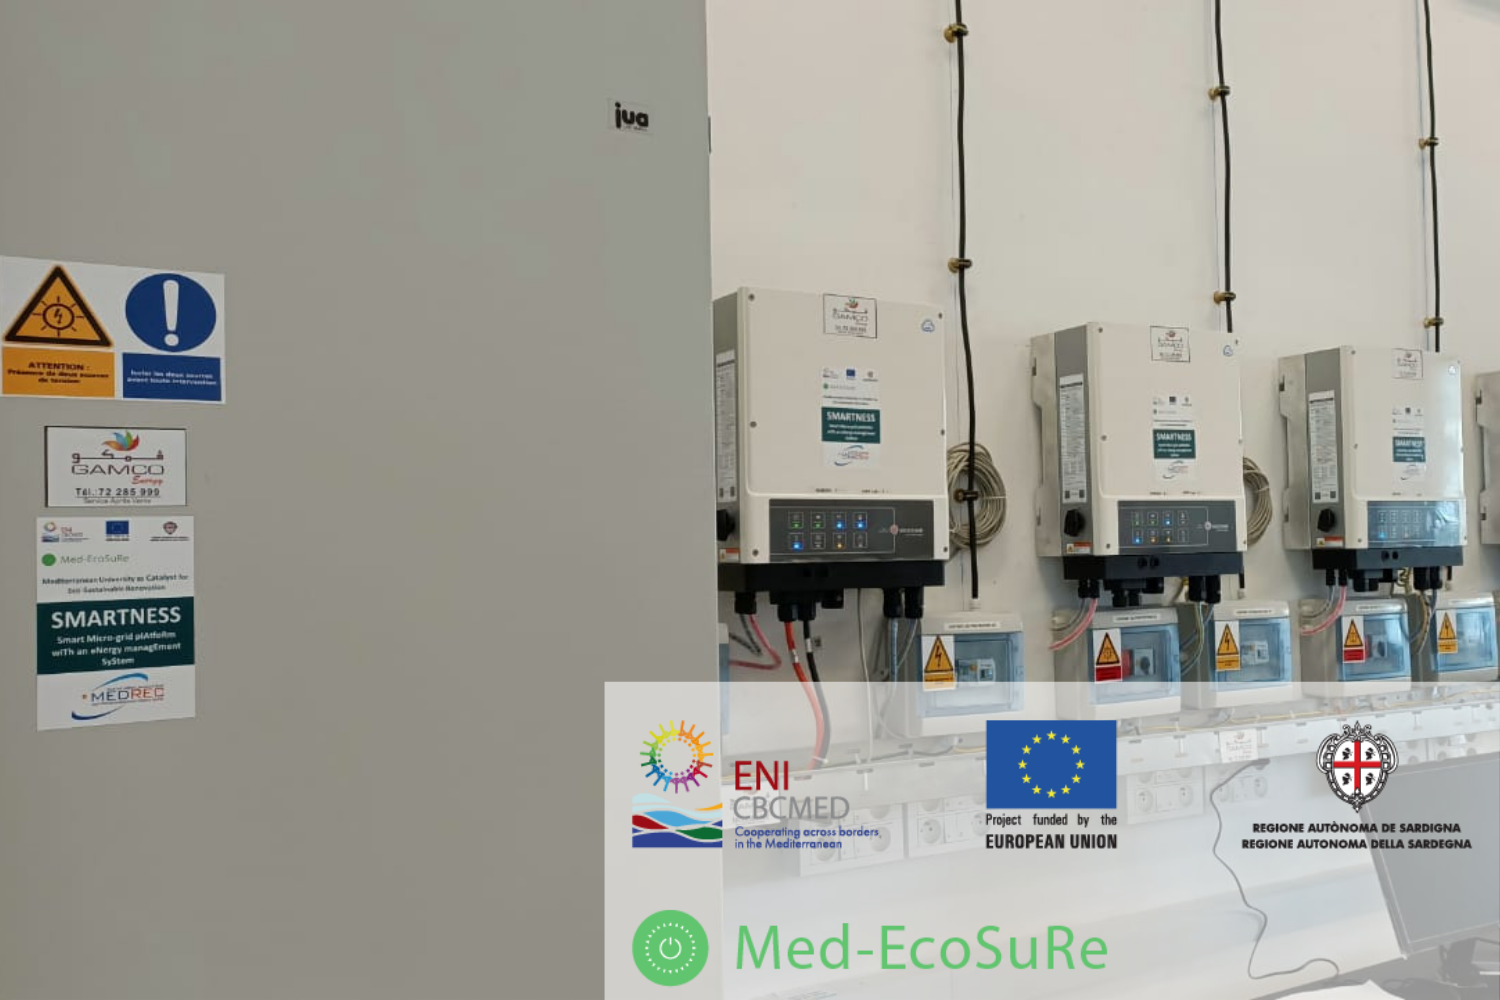 Med-EcoSuRe sets the stage for energy generation and trading in a Micro-Grid platform